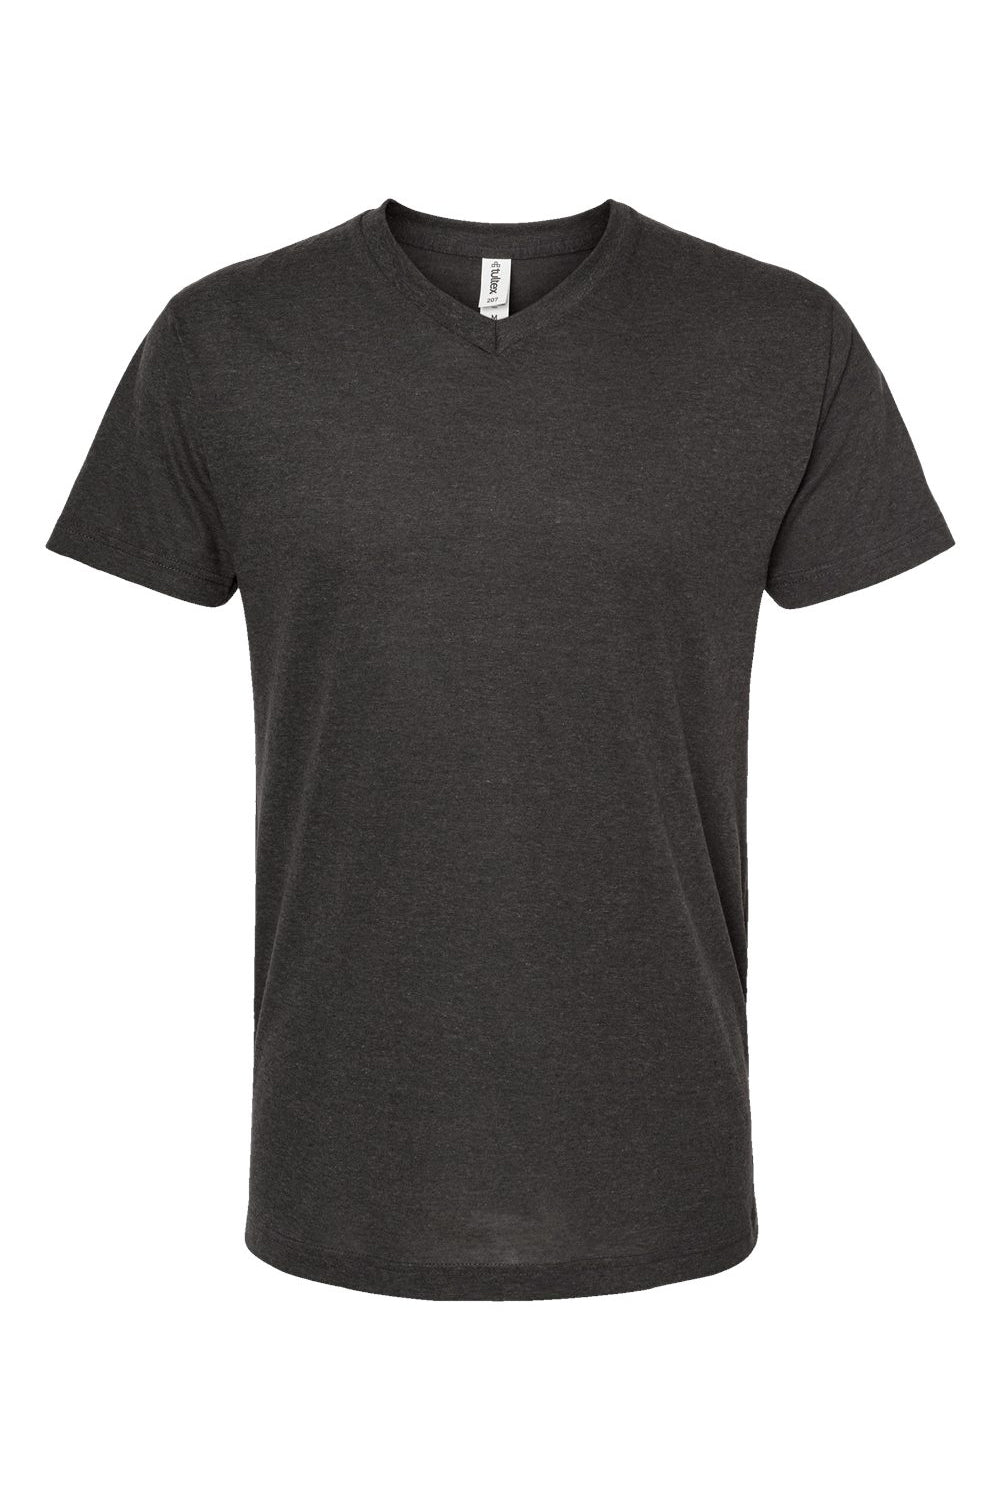 Tultex 207 Mens Poly-Rich Short Sleeve V-Neck T-Shirt Heather Graphite Grey Flat Front